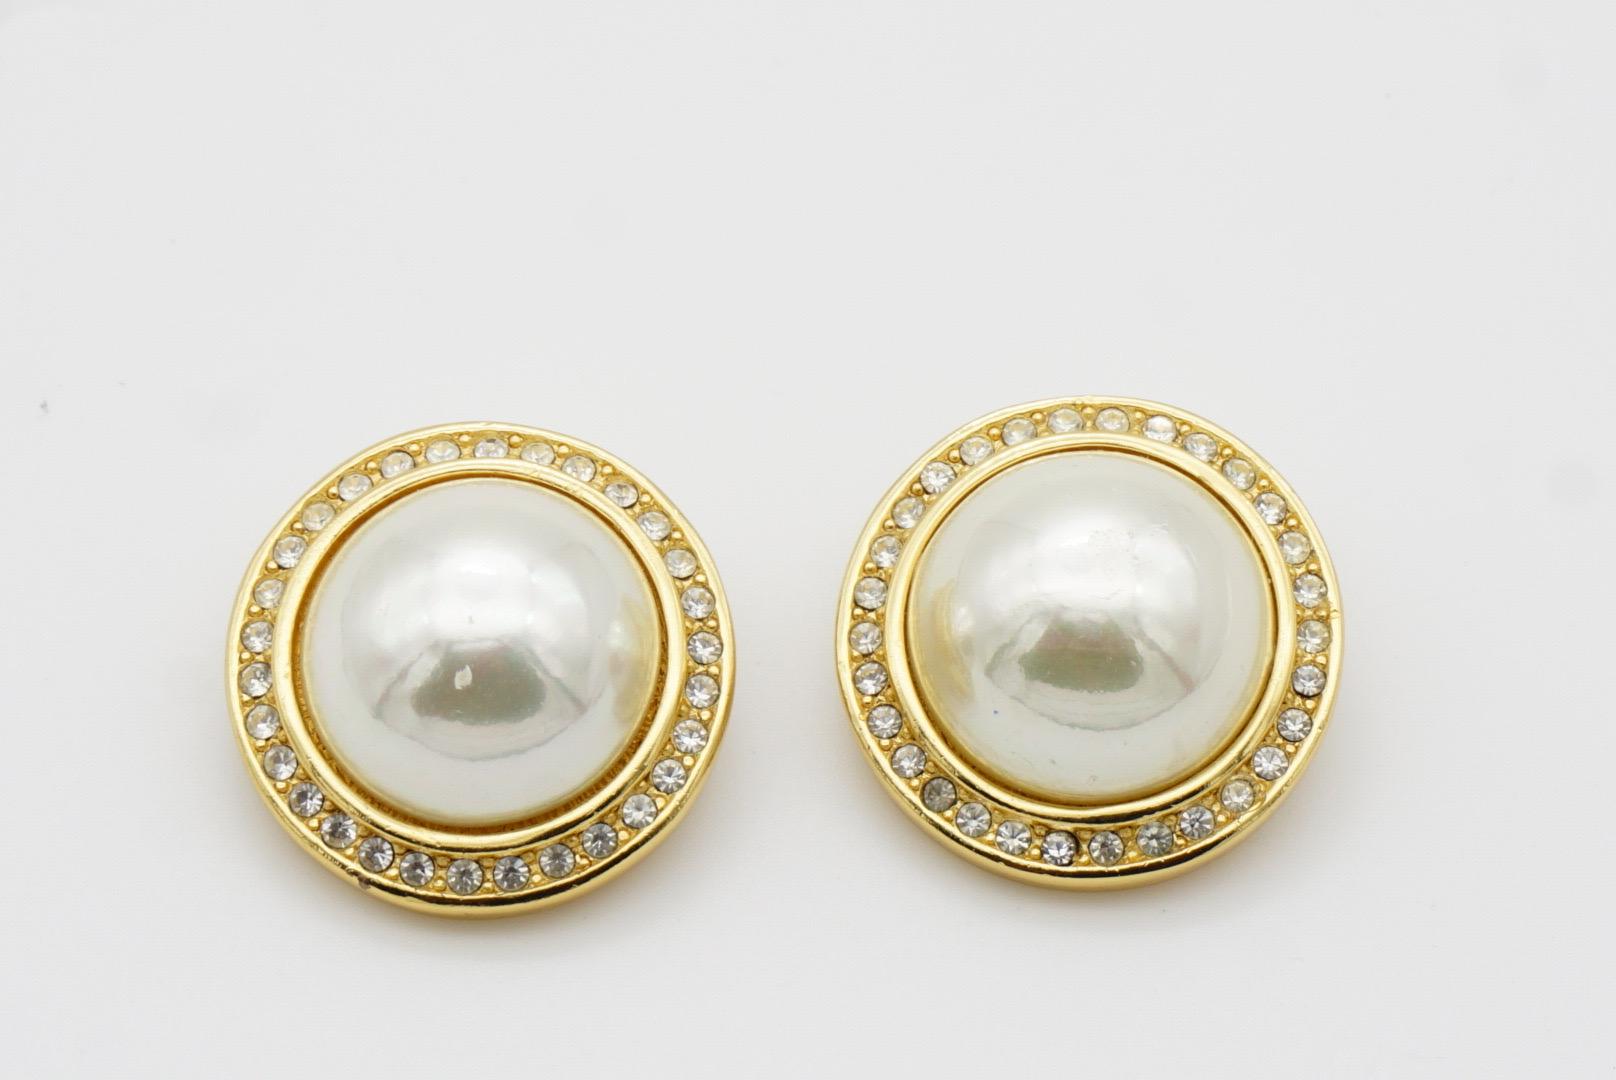 Christian Dior GROSSE 1990 CHC Large Round White Pearl Crystals Clip Earrings For Sale 3